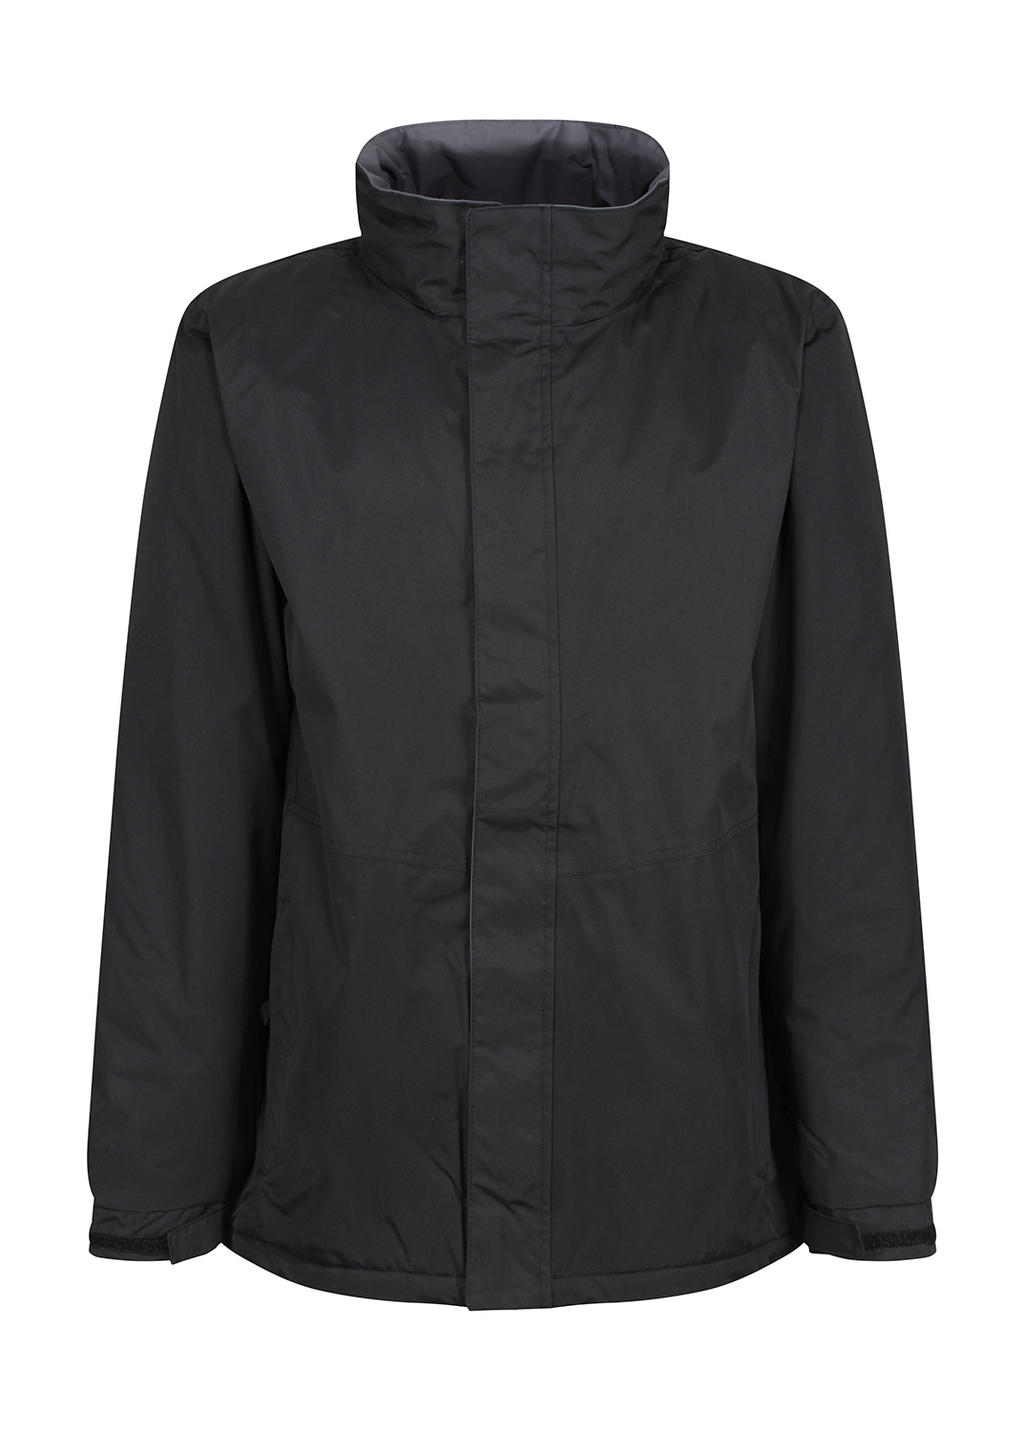  Beauford Insulated Jacket in Farbe Black